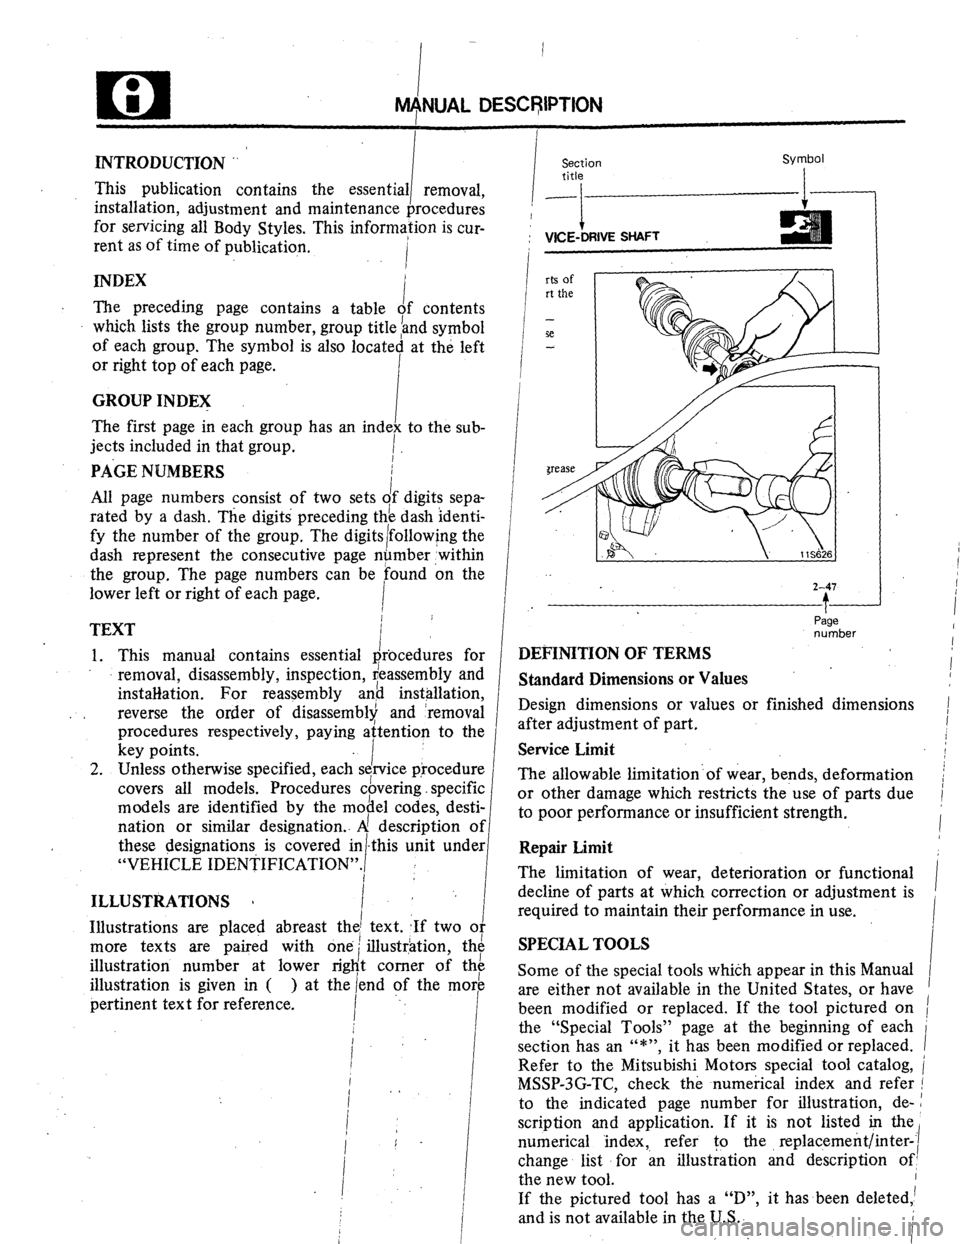 MITSUBISHI MONTERO 1984 1.G Workshop Manual INTRODUCTION .. 
i Section 
title 
I 
: VICE-DRIVE SHAFT 
i 
This publication contains the 
essential removal, 
I 
installation, adjustment and maintenance procedures 
for servicing all Body Styles. T